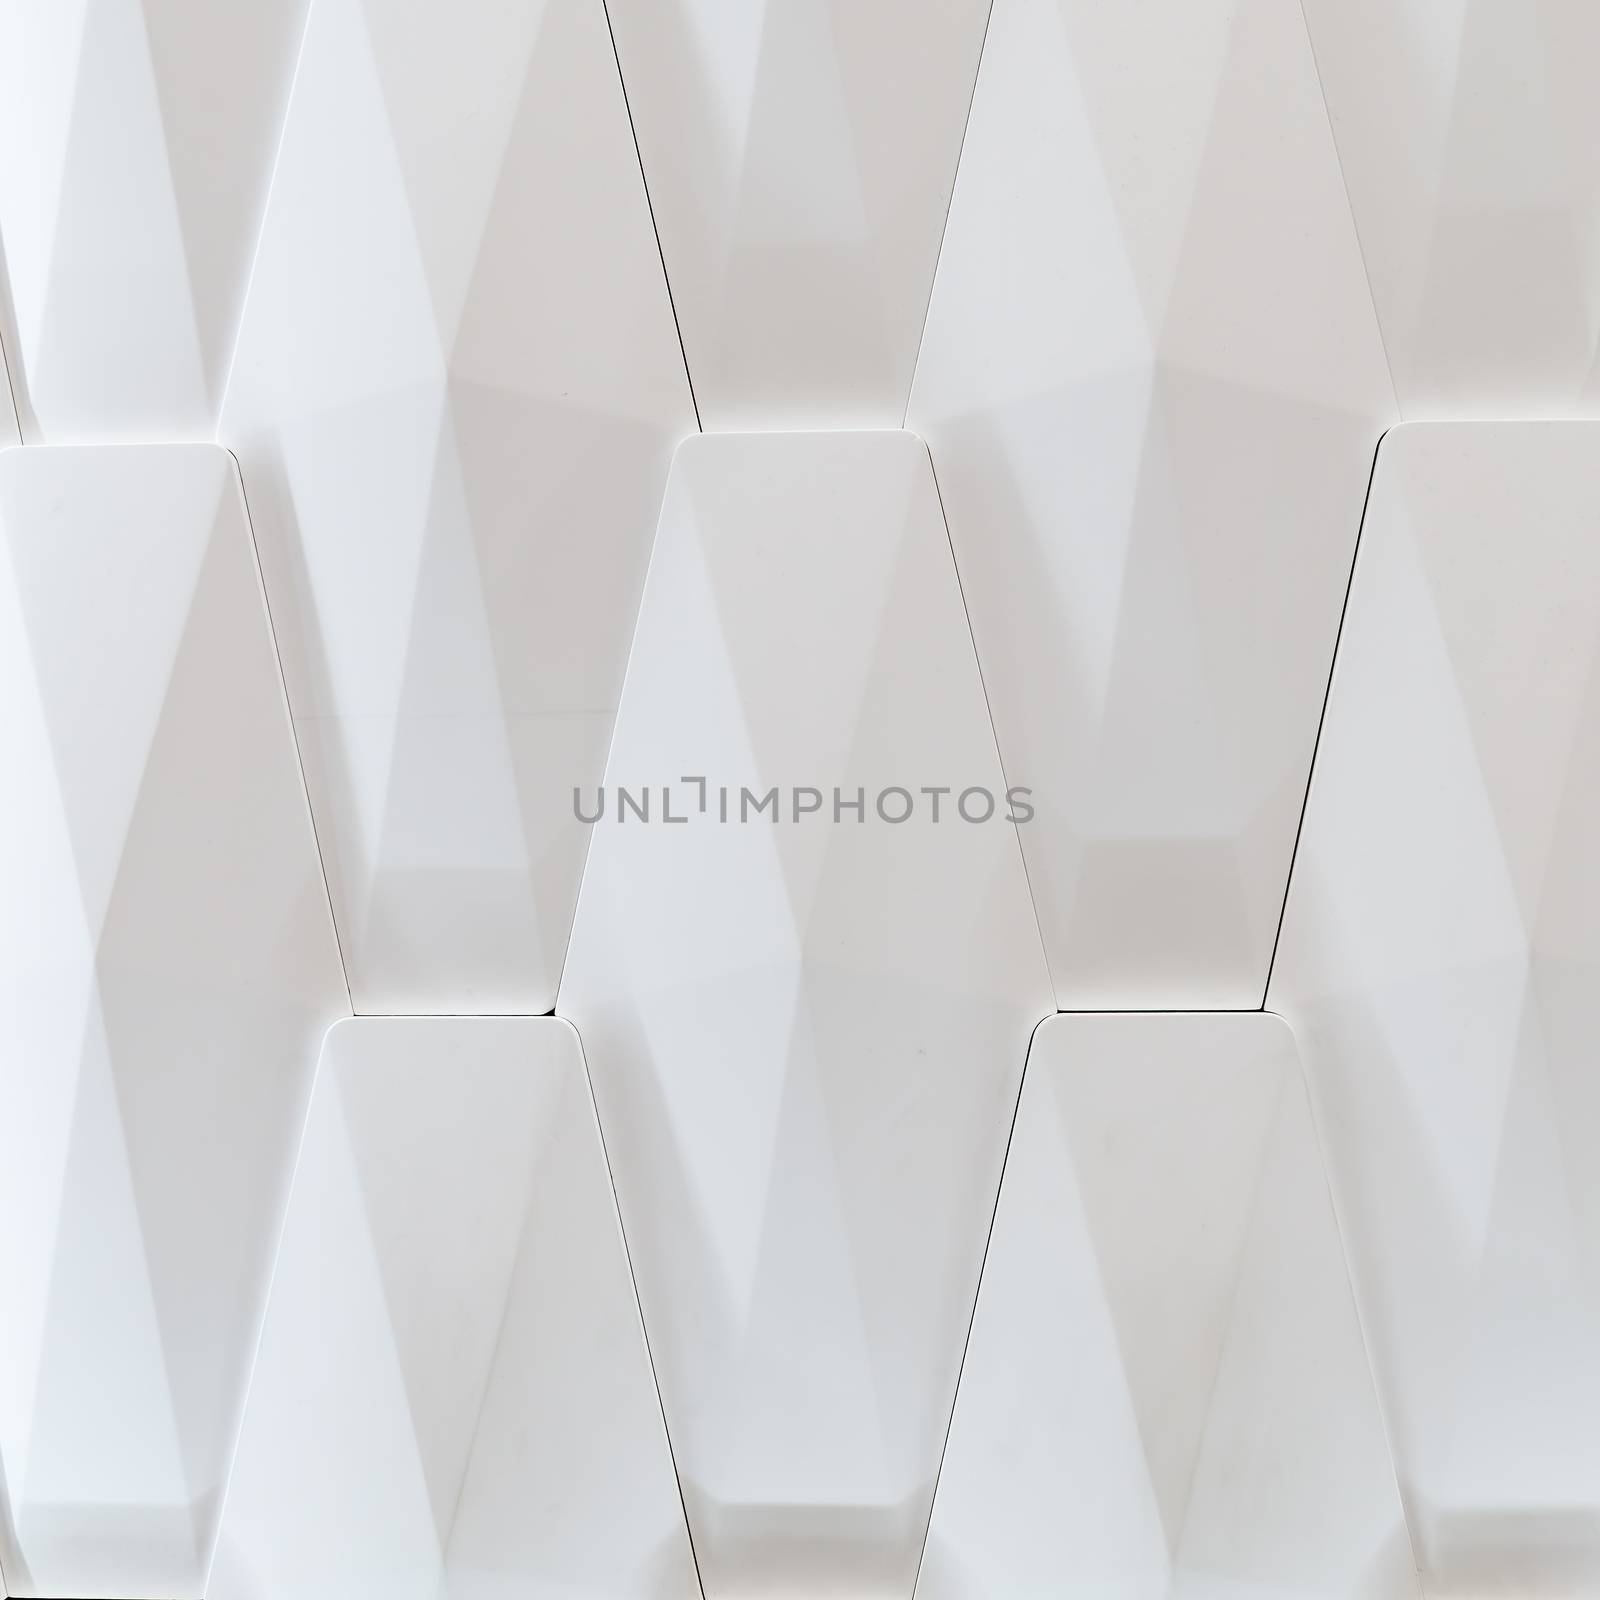 3D decorative wall for the interior of an unusual geometric shape. White light background with a pattern imitating a tree. Abstract texture